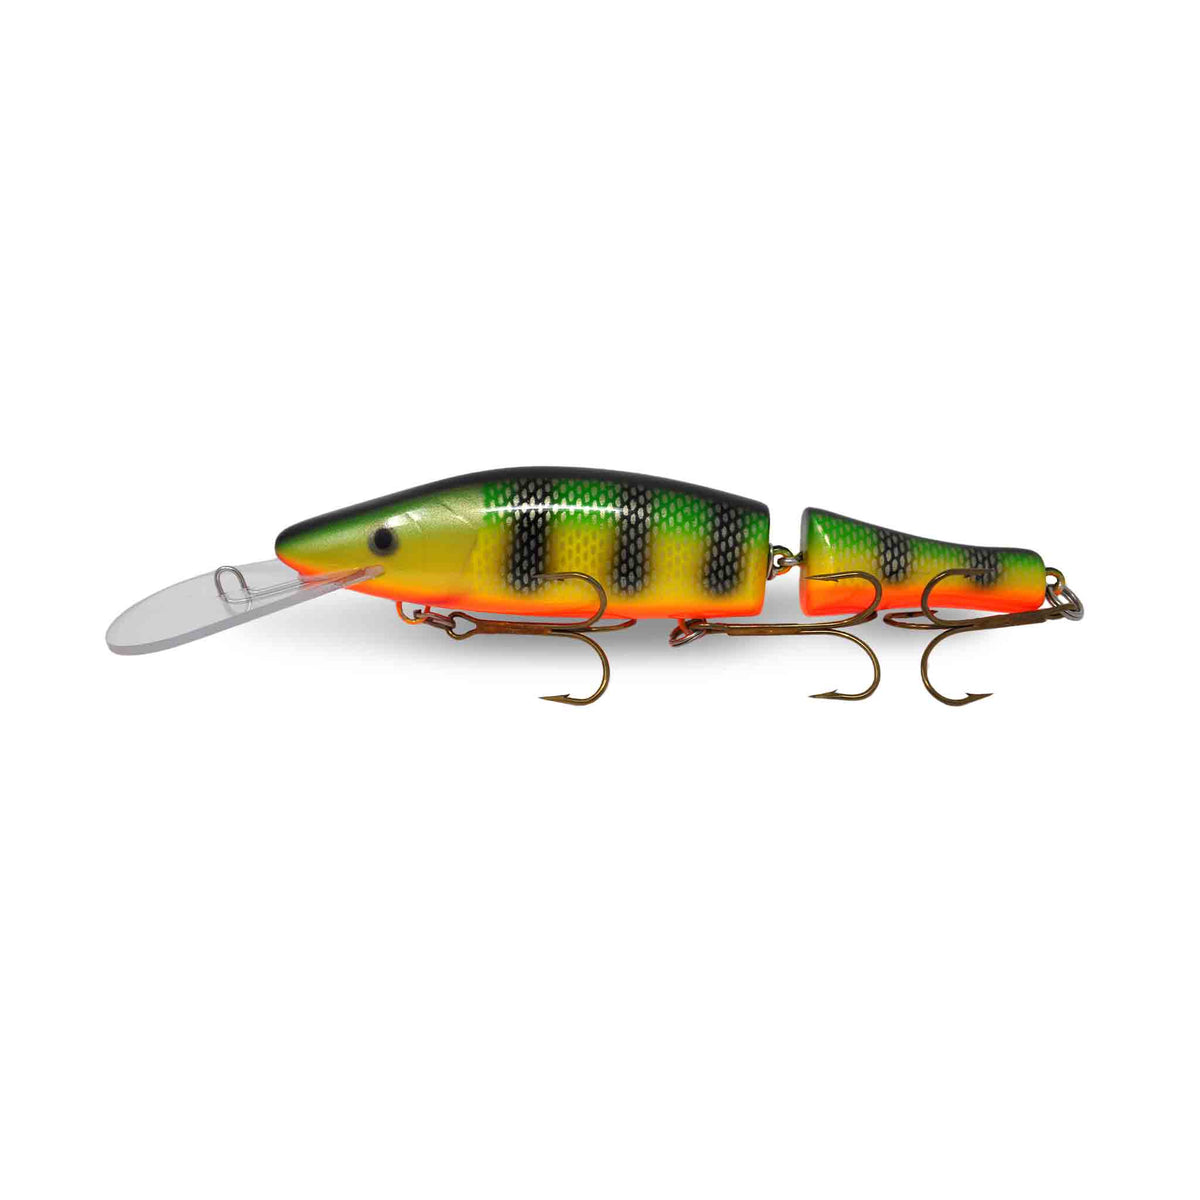 View of Crankbaits Legend lures Jointed Perch Bait Crankbait Perch / Orange Belly available at EZOKO Pike and Musky Shop